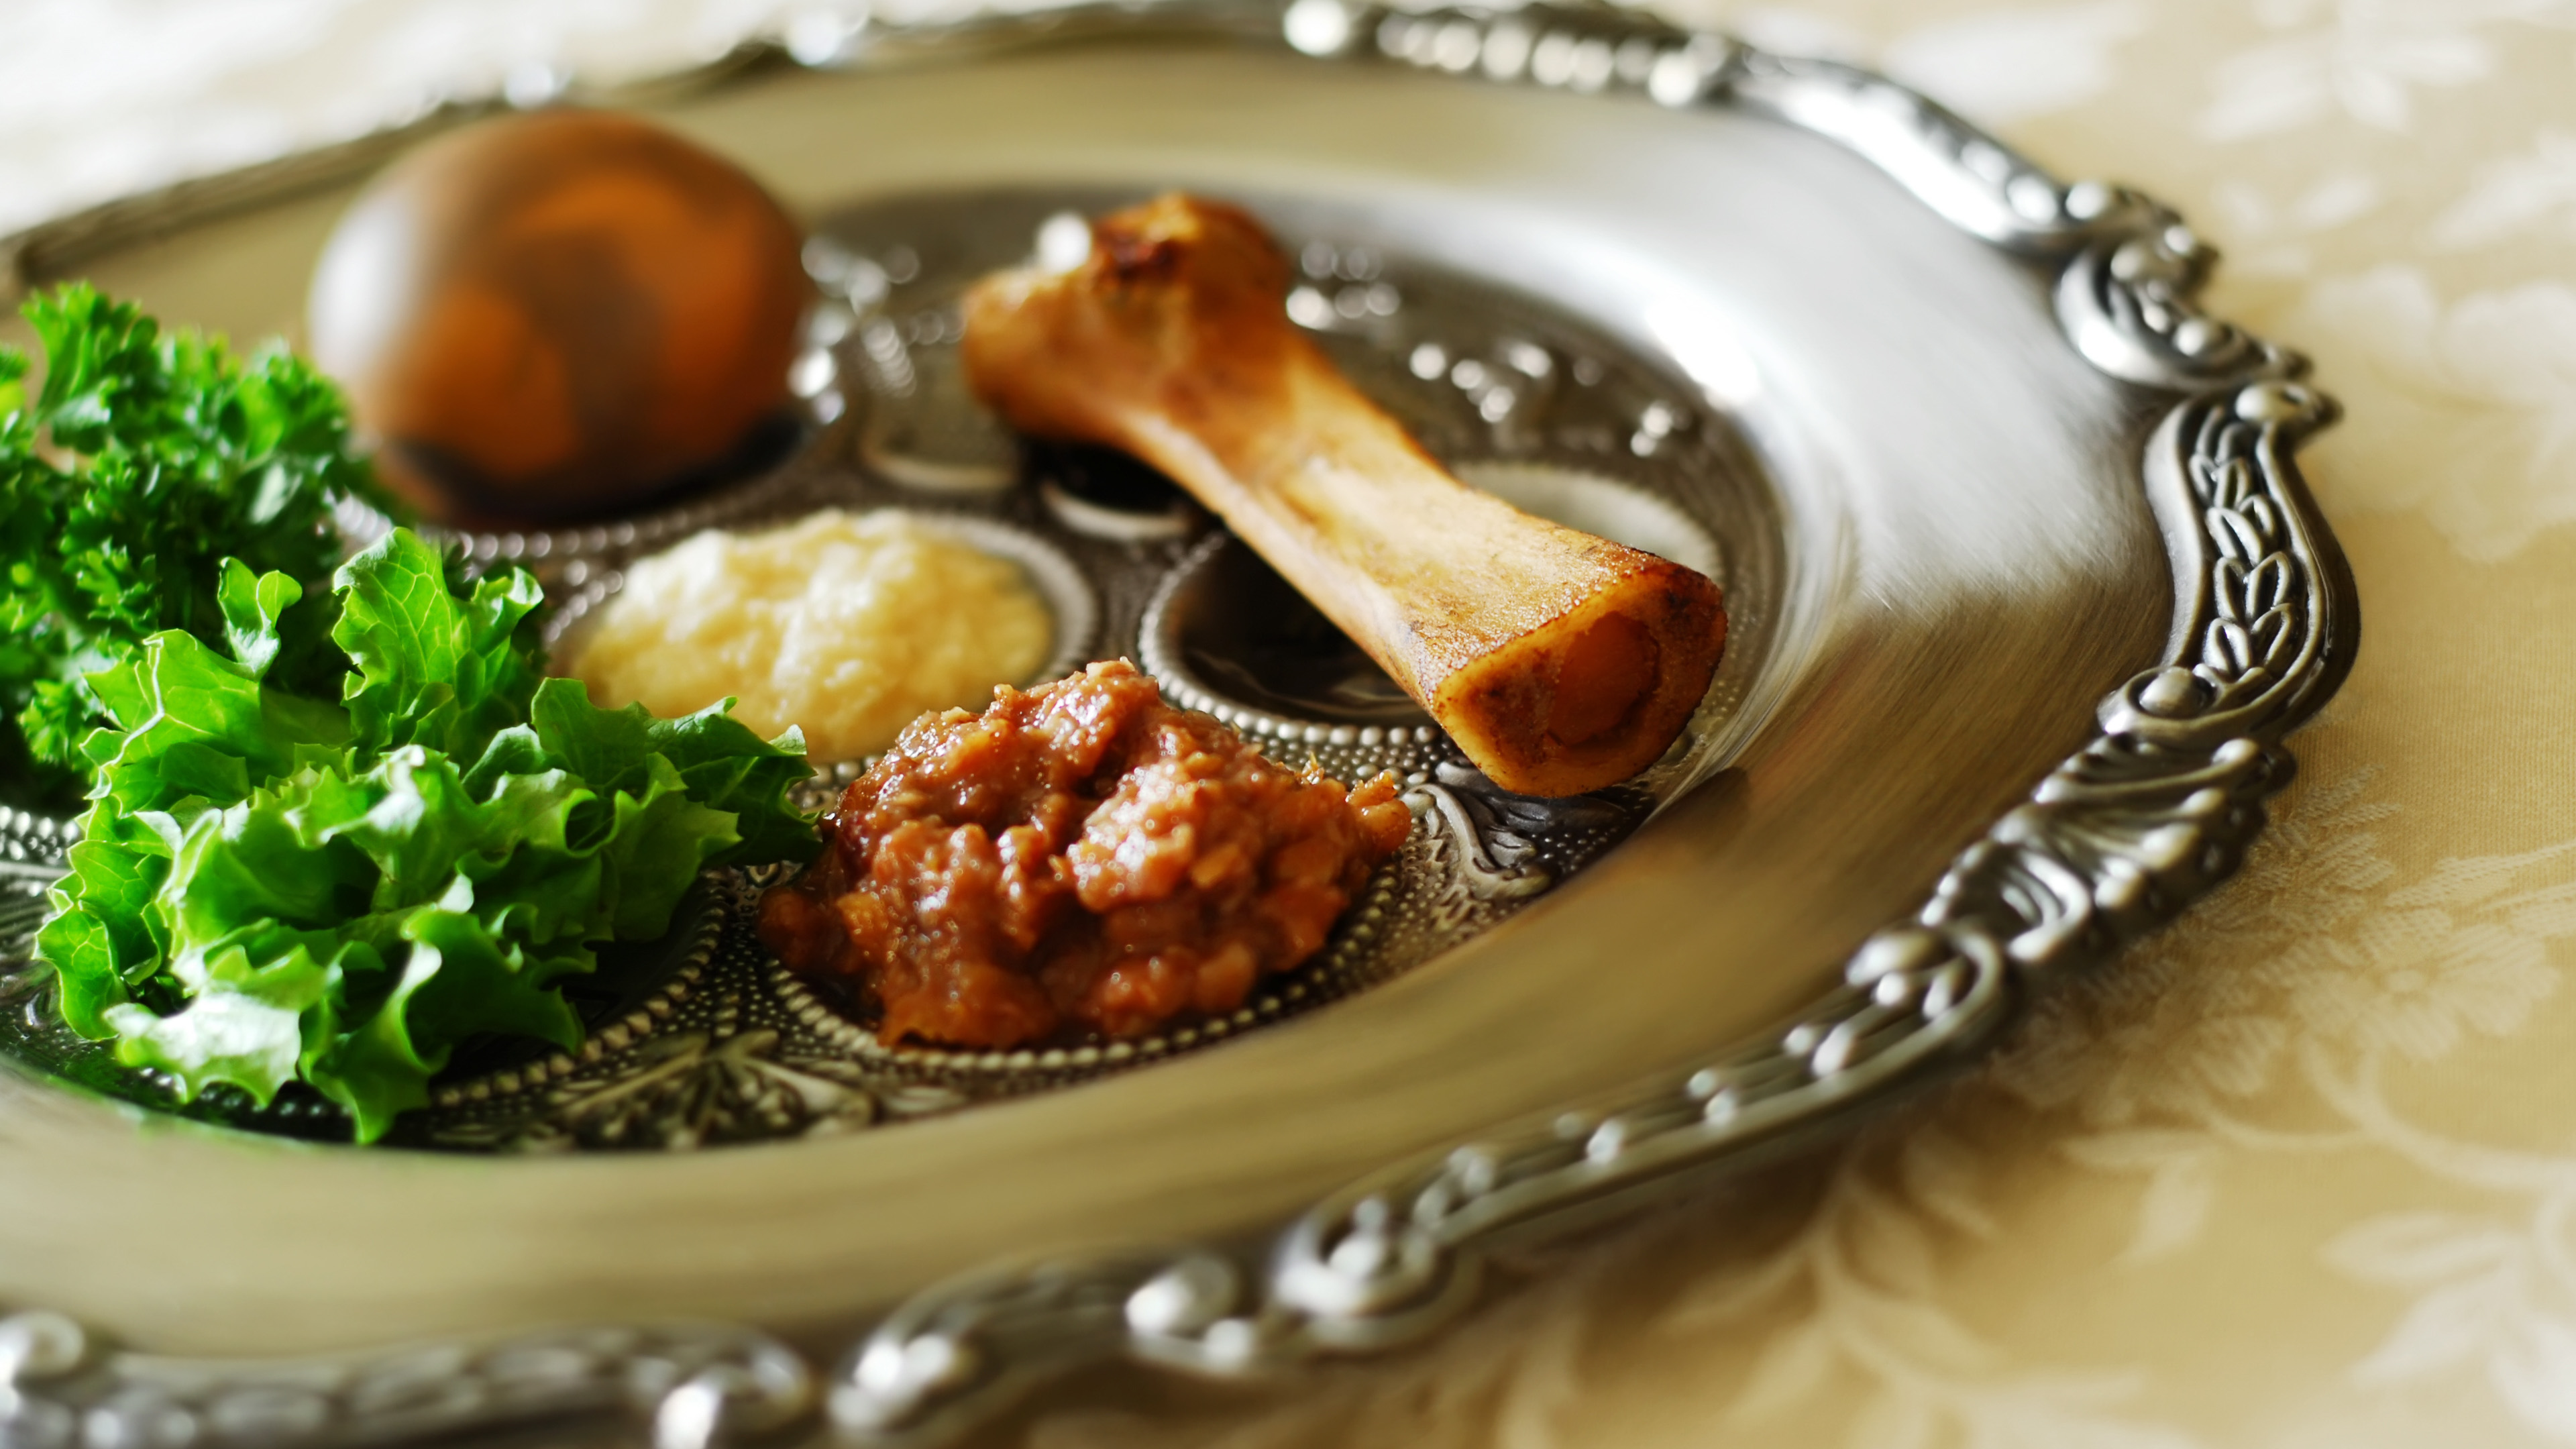 Traditional symbols on a seder plate for the Jewish festival of Passover